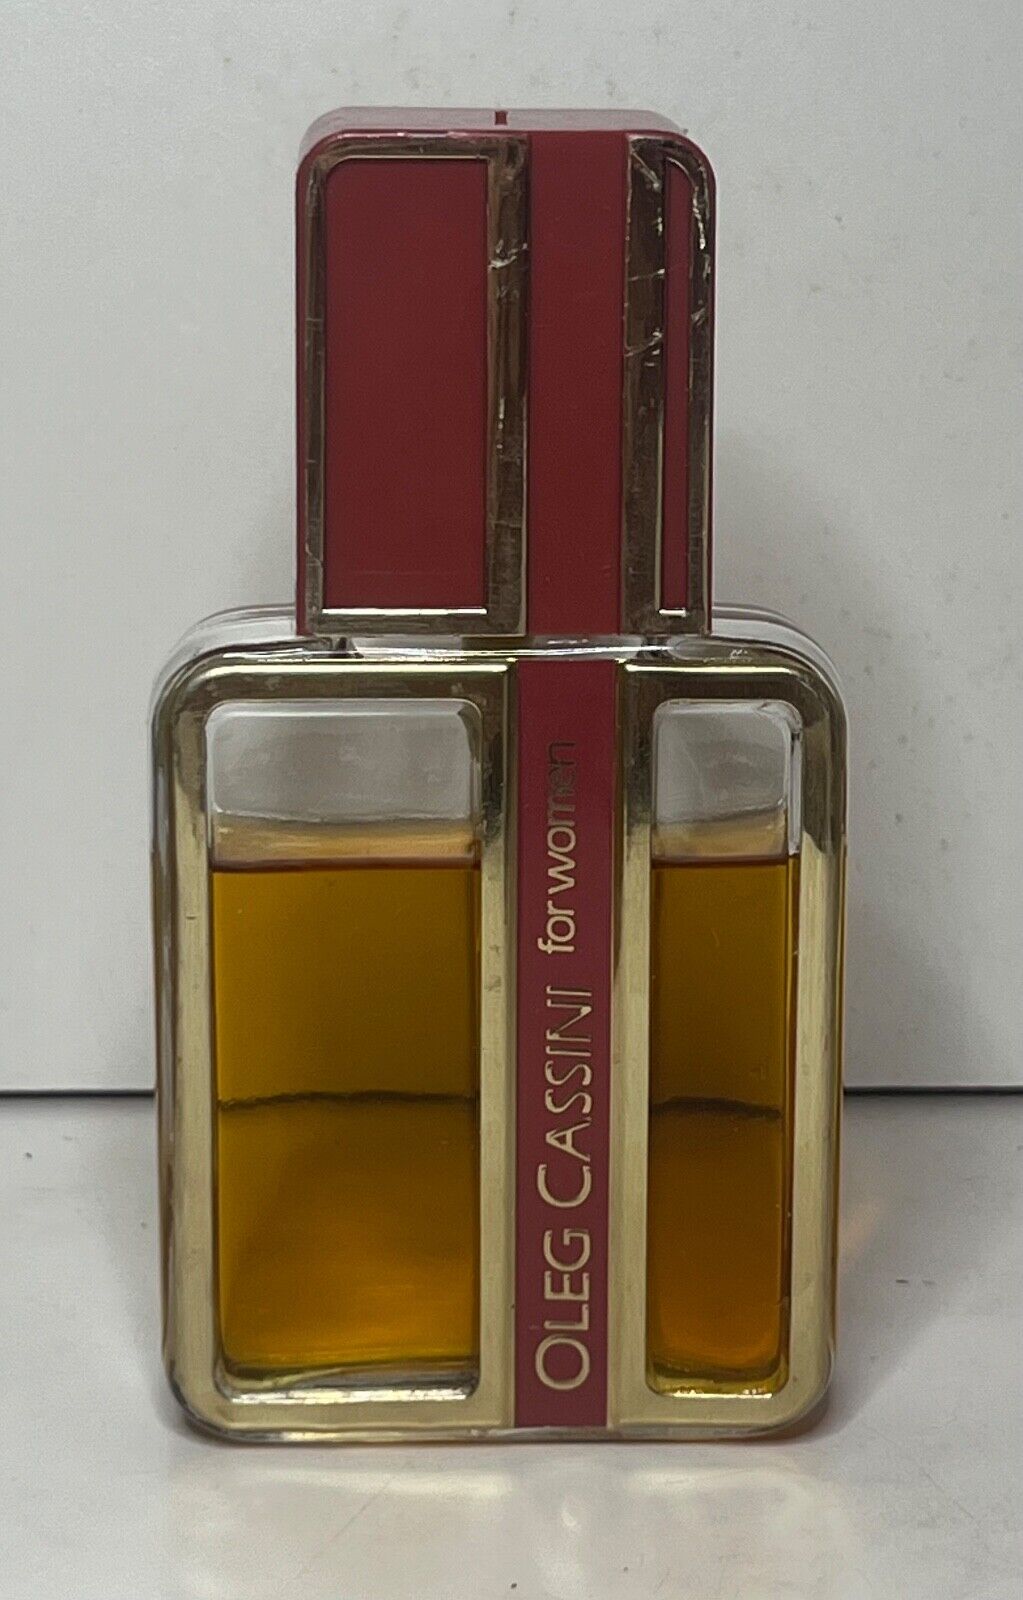 Vintage Oleg Cassini for Women Cologne Concentrate Spray by Jovan 2 oz. Perfume